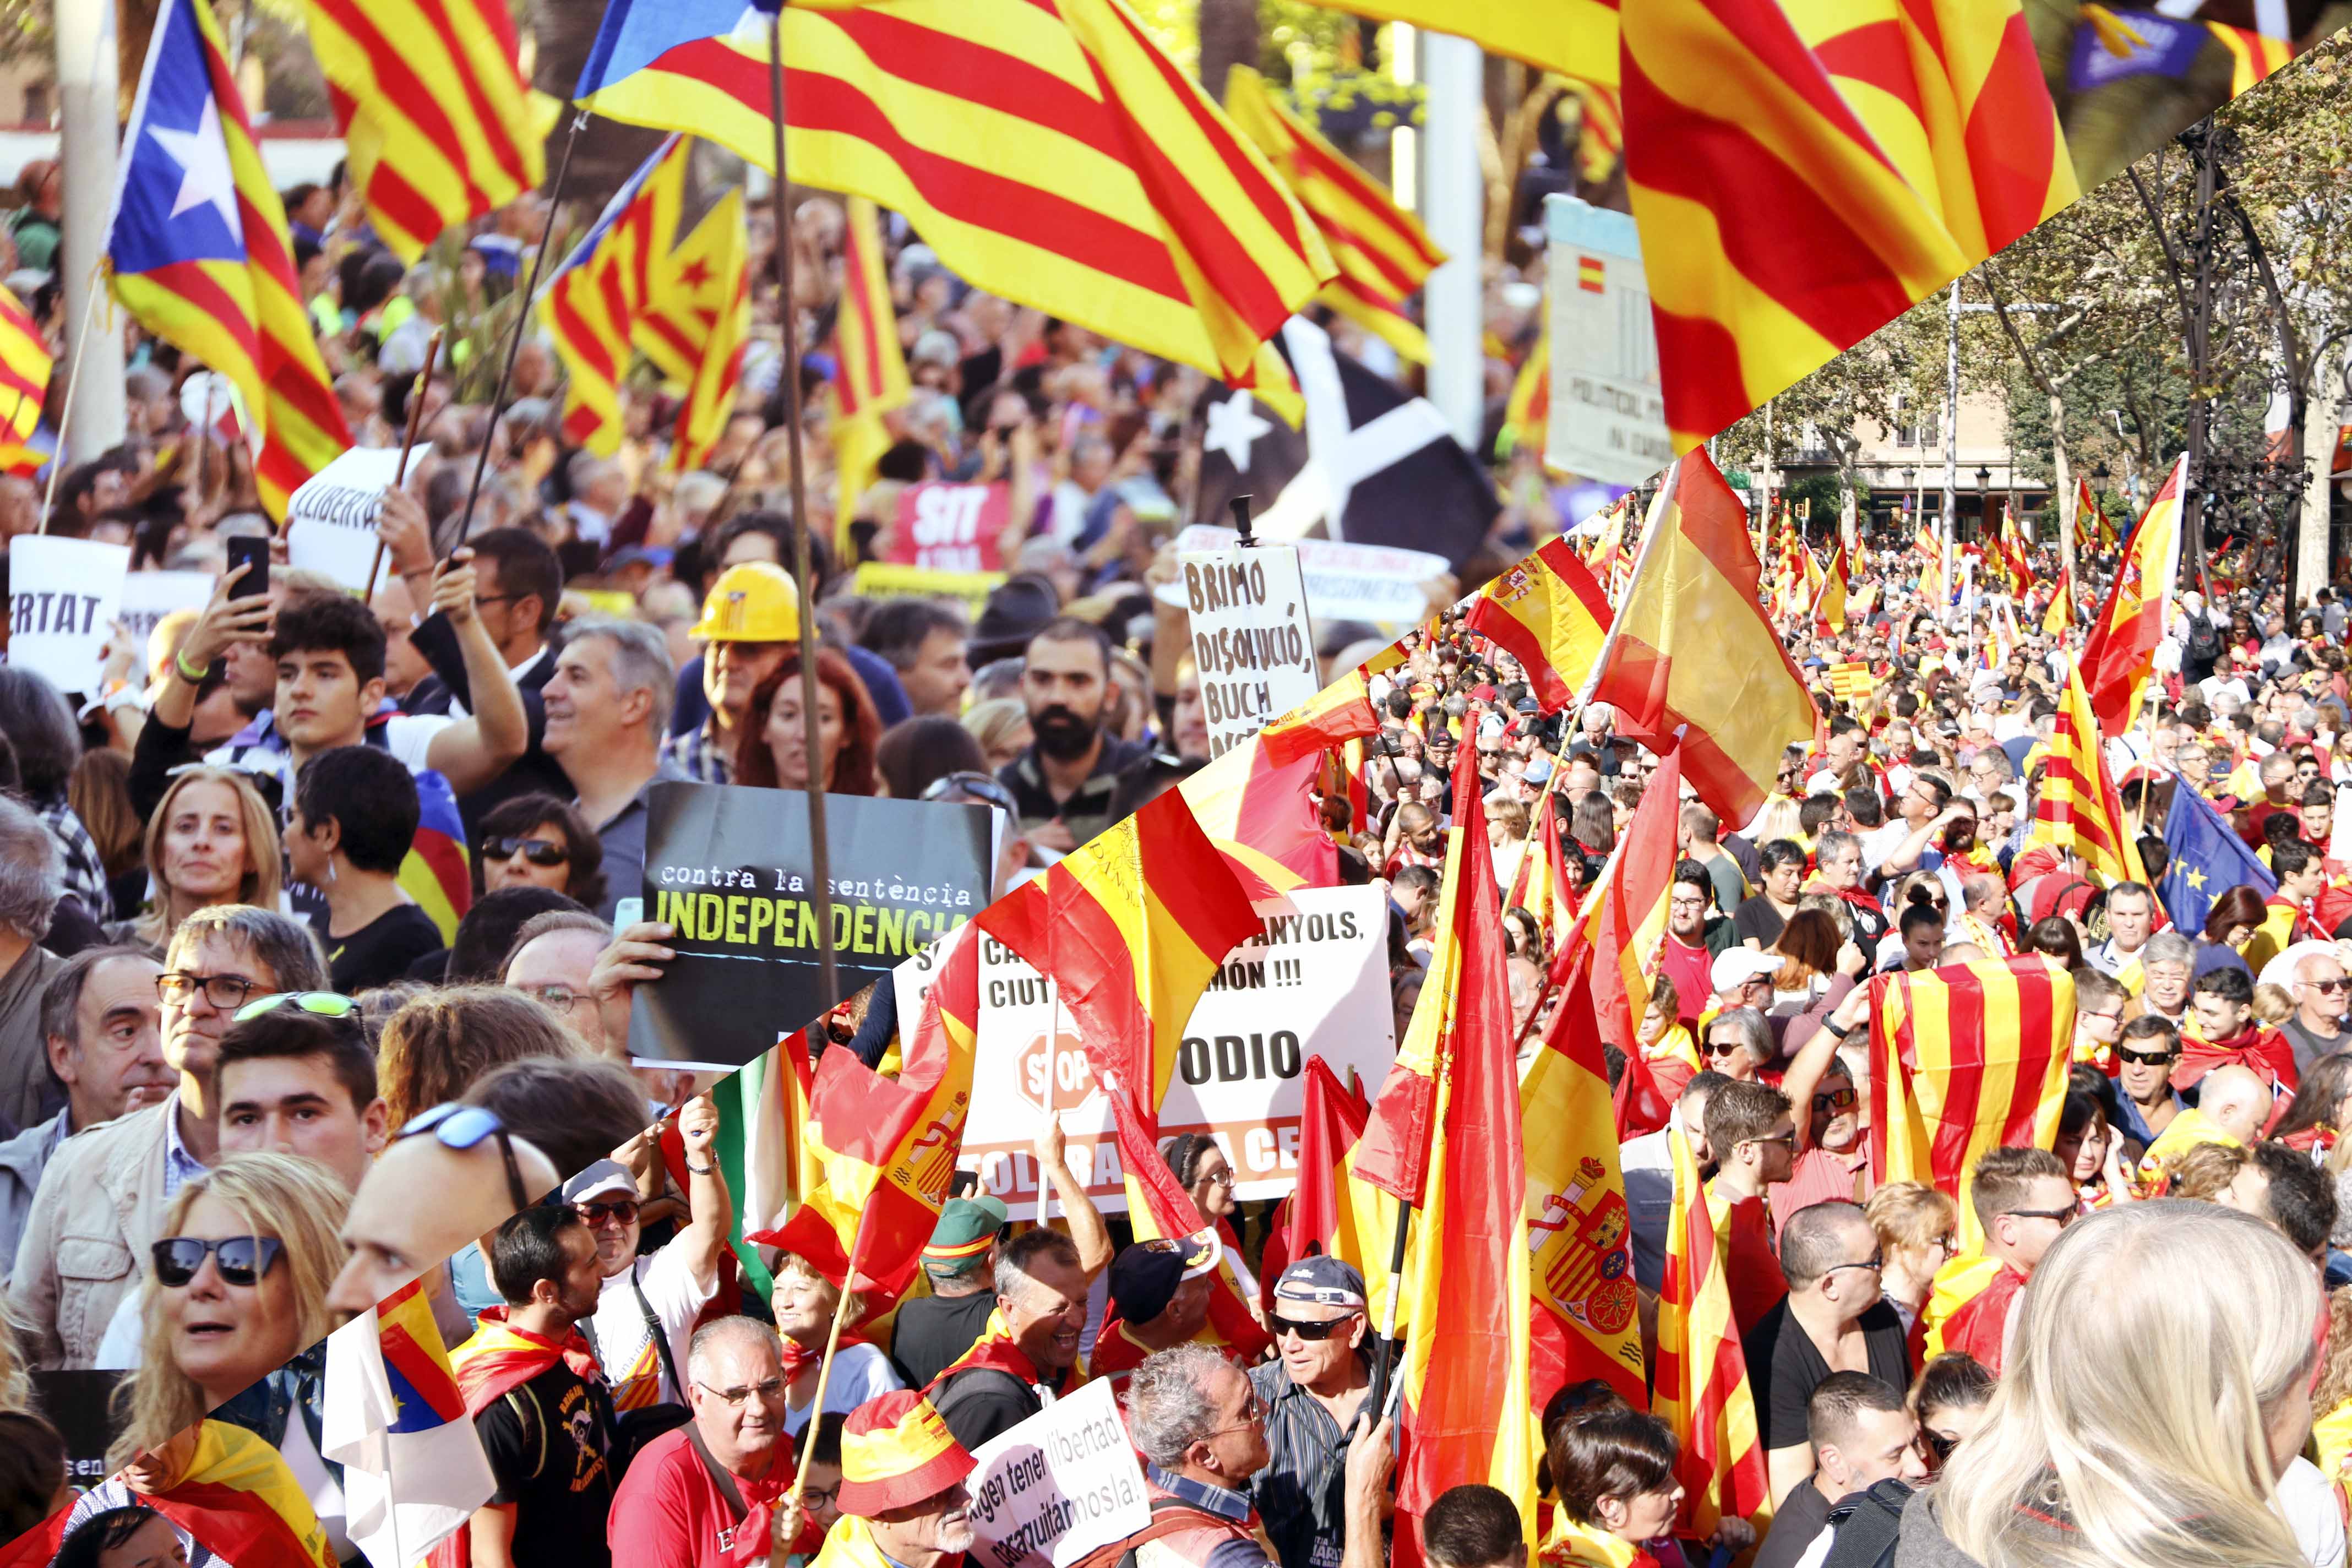 350,000 pro-independence supporters took to the streets of Barcelona on Saturday while 80,000 marched for Spanish unity on Sunday